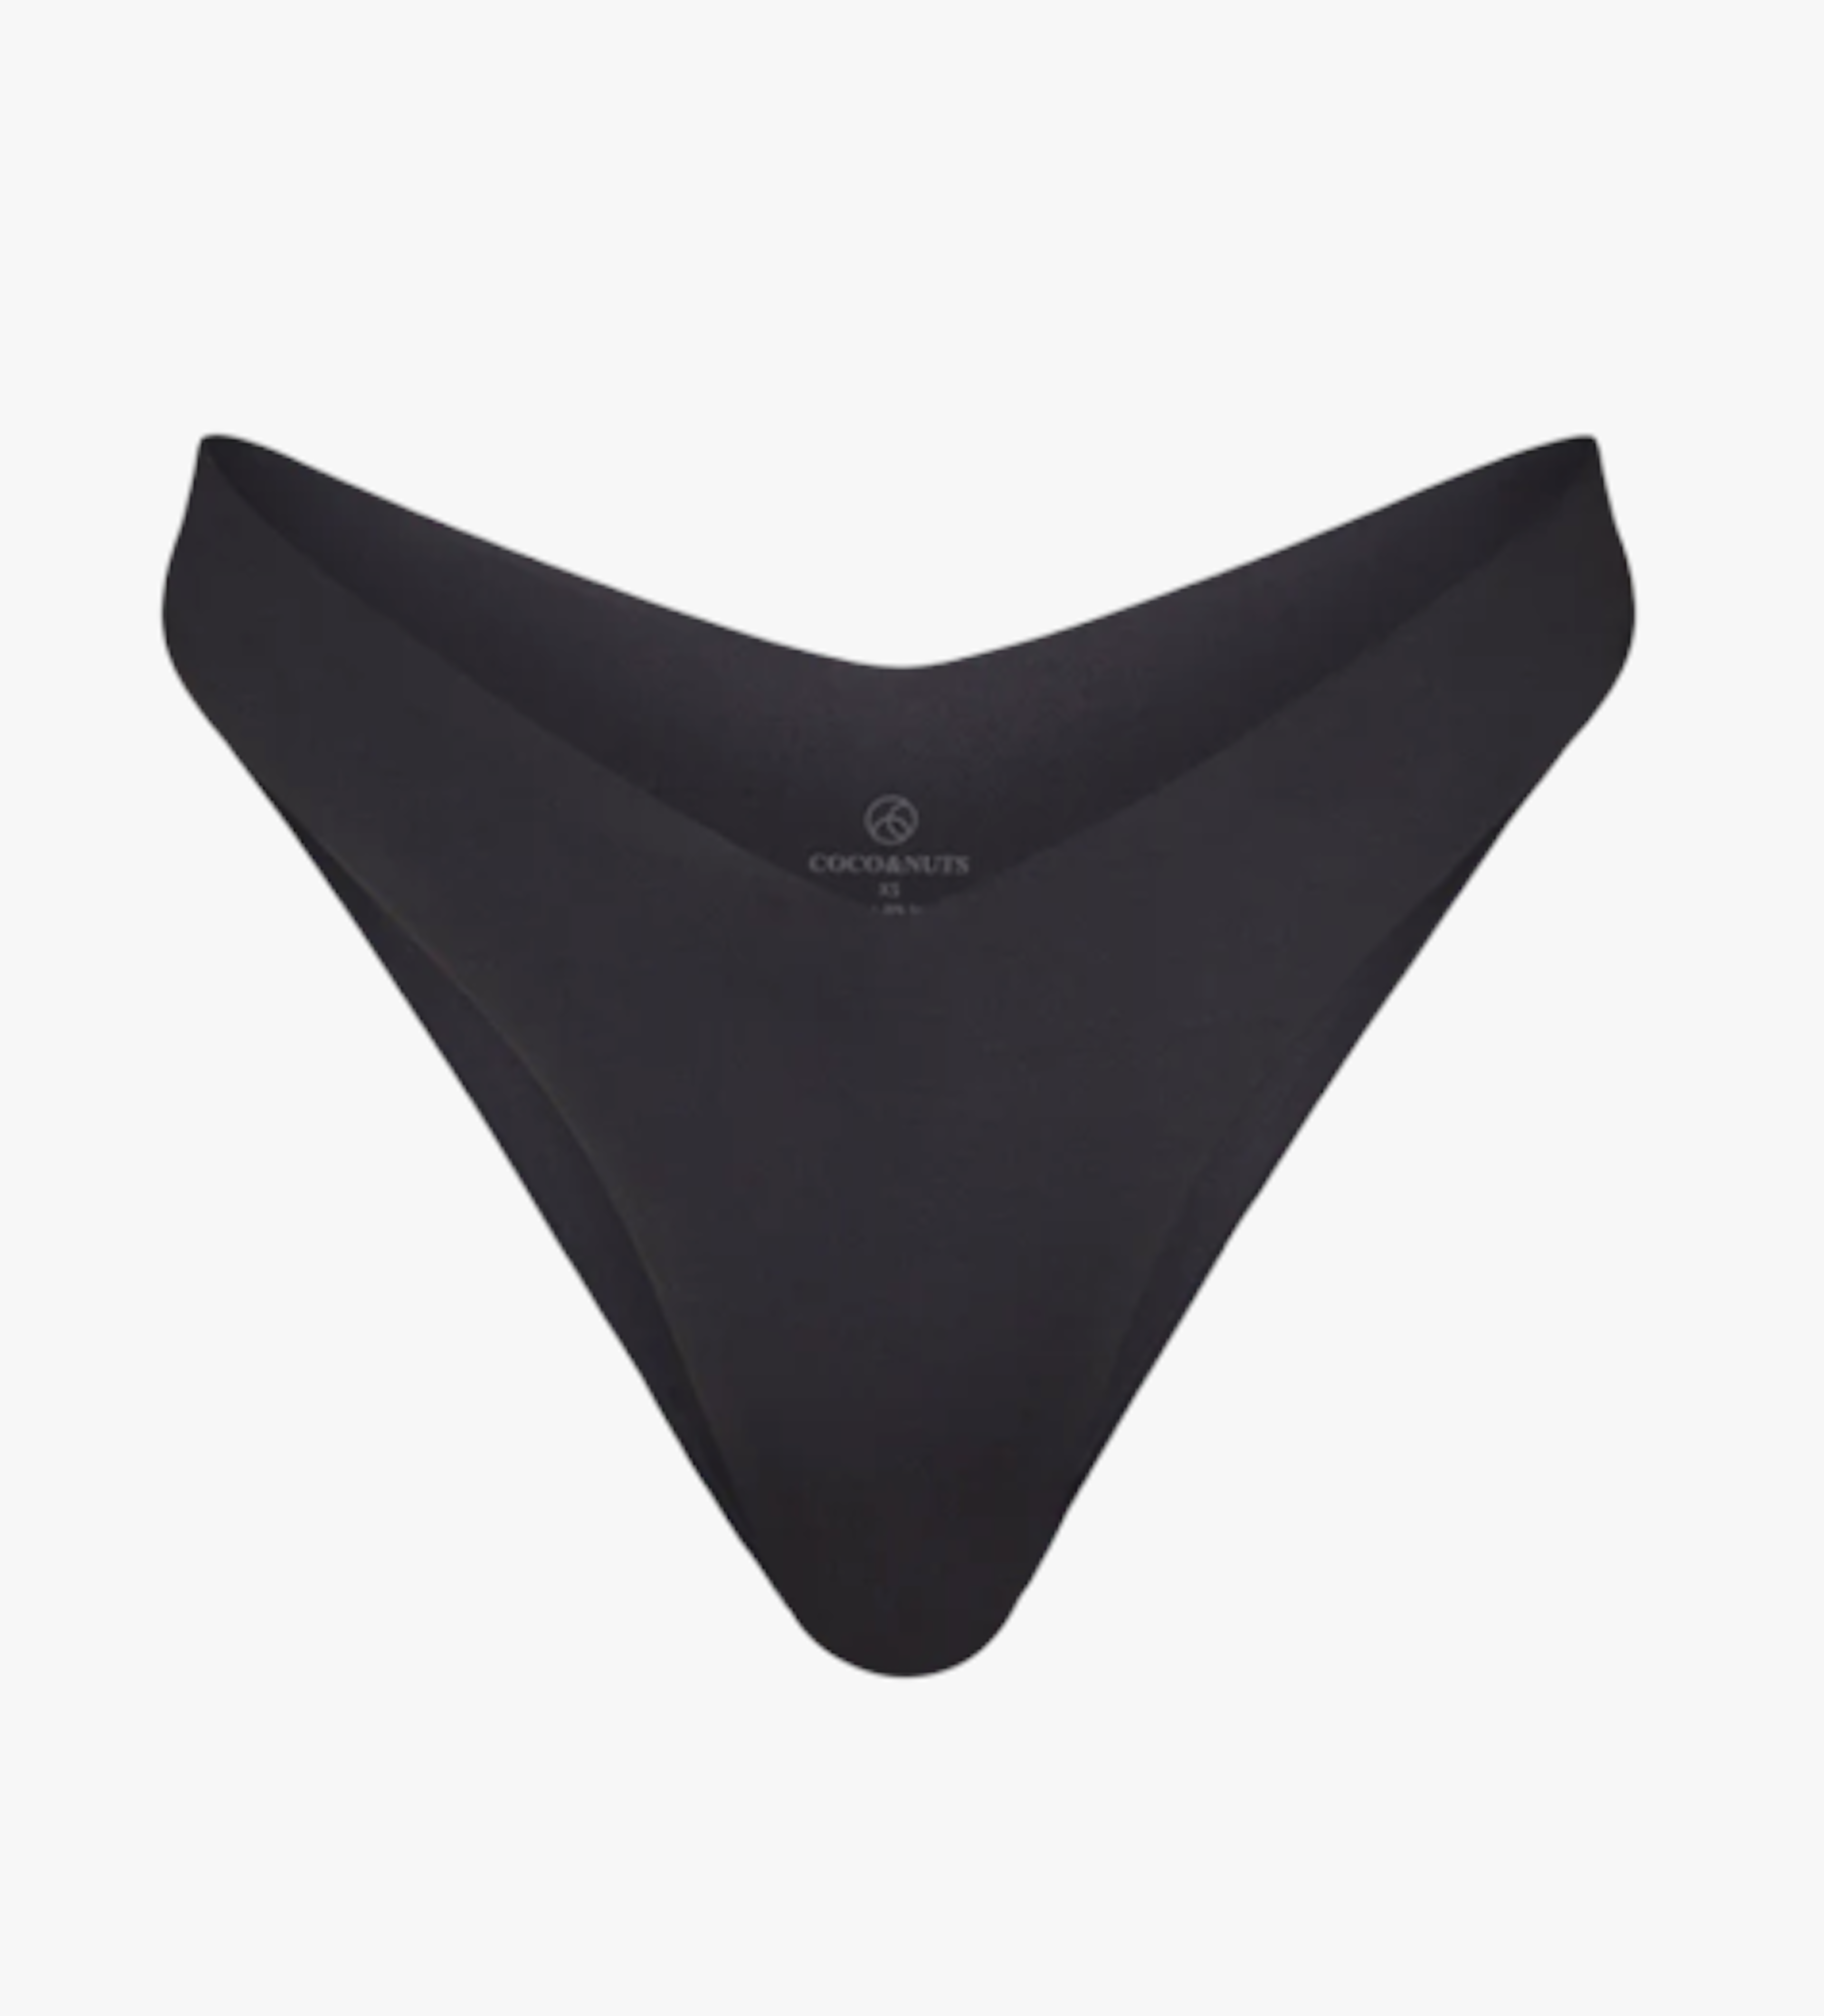 Shop VENUS BOTTOM - BLACK from Coco & Nuts at Seezona